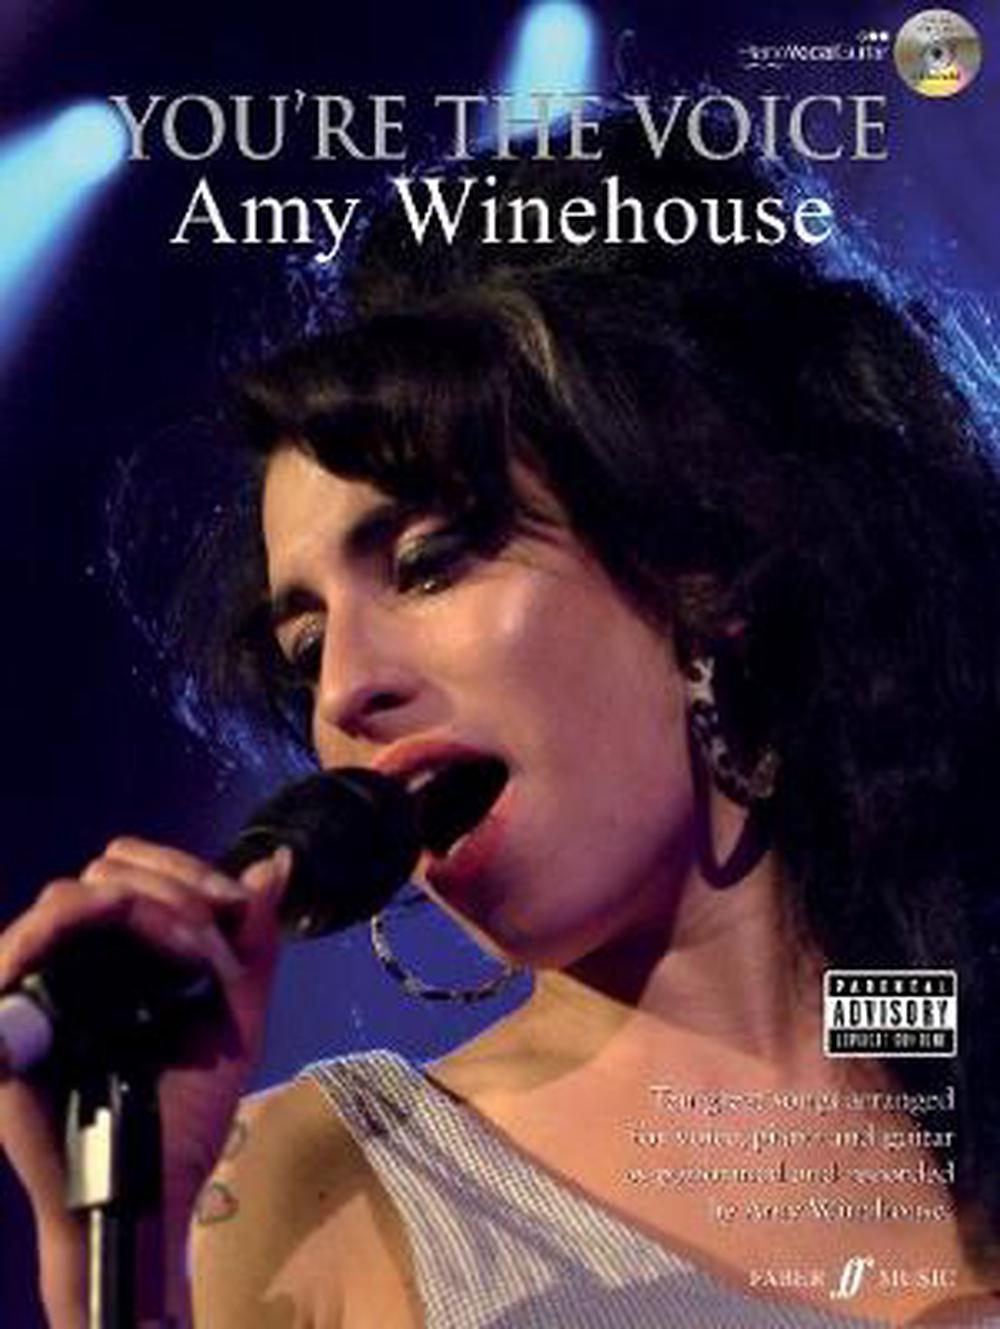 Amy Winehouse by Amy Winehouse (English) Book & Merchandise Book Free